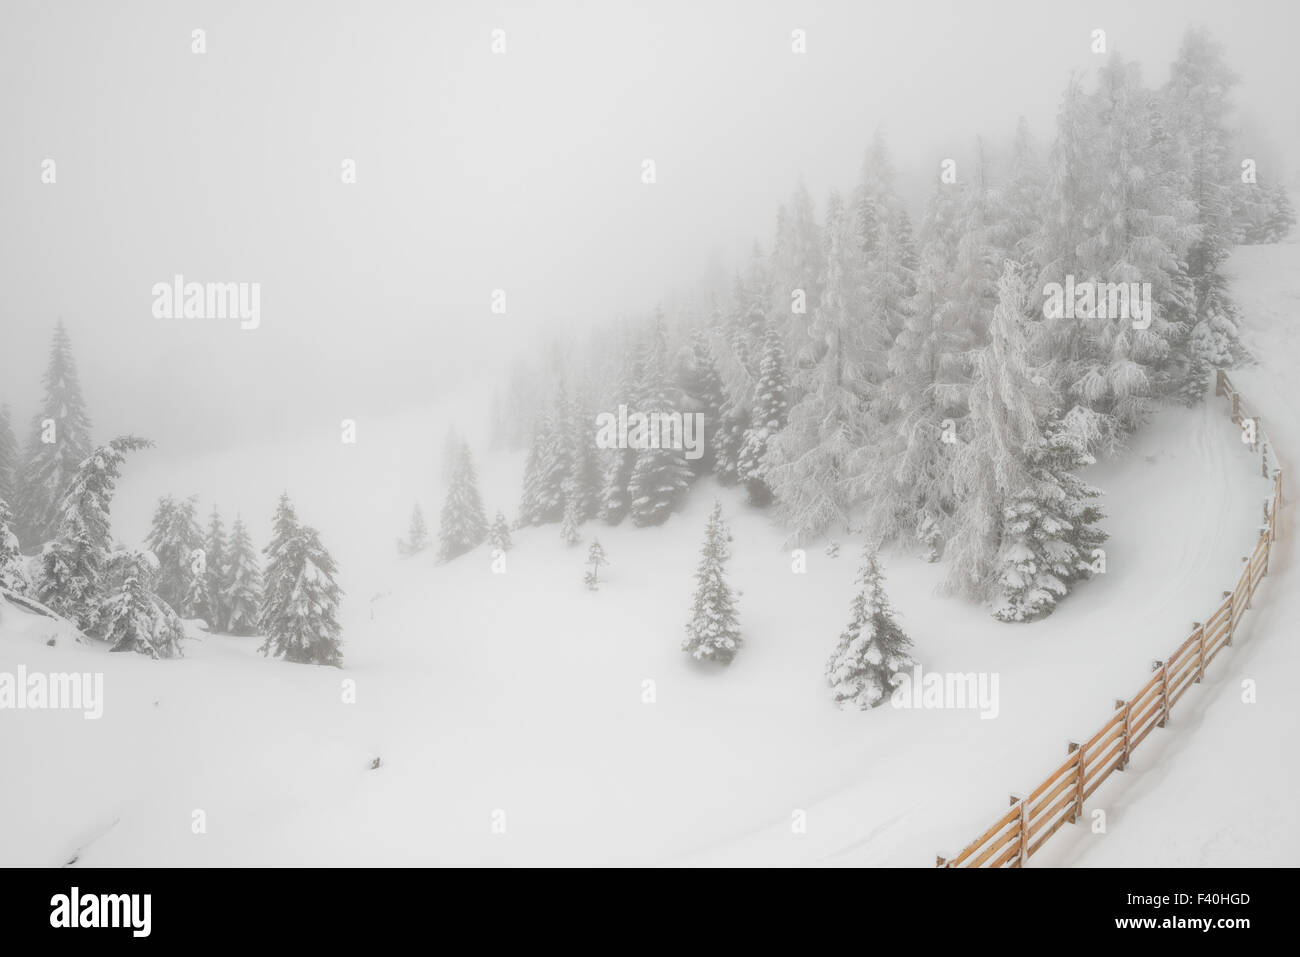 Snowfall in mountain winter forest Stock Photo